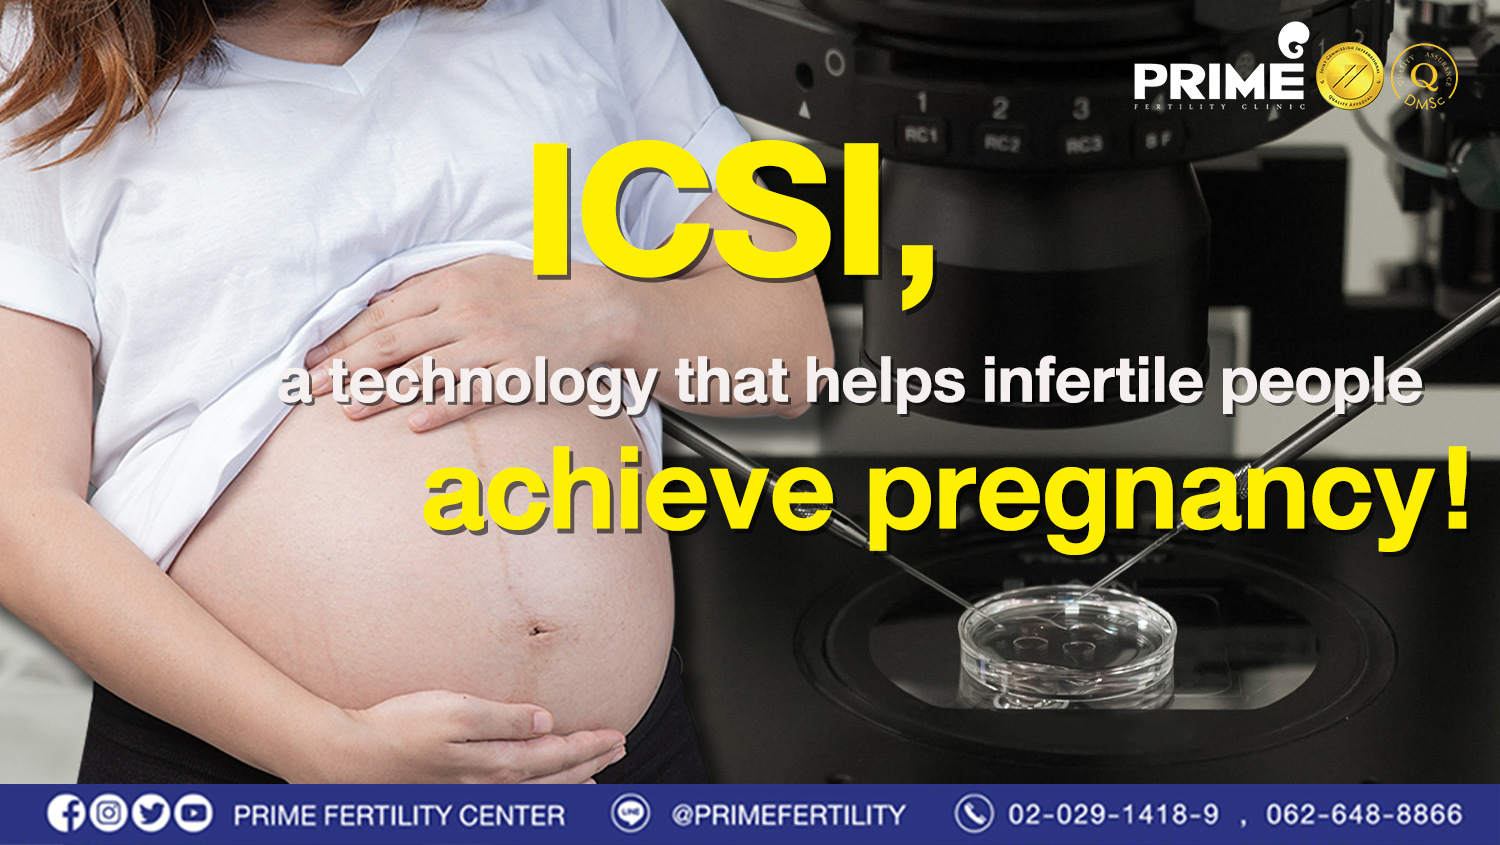 ICSI, a technology that helps infertile people achieve pregnancy!